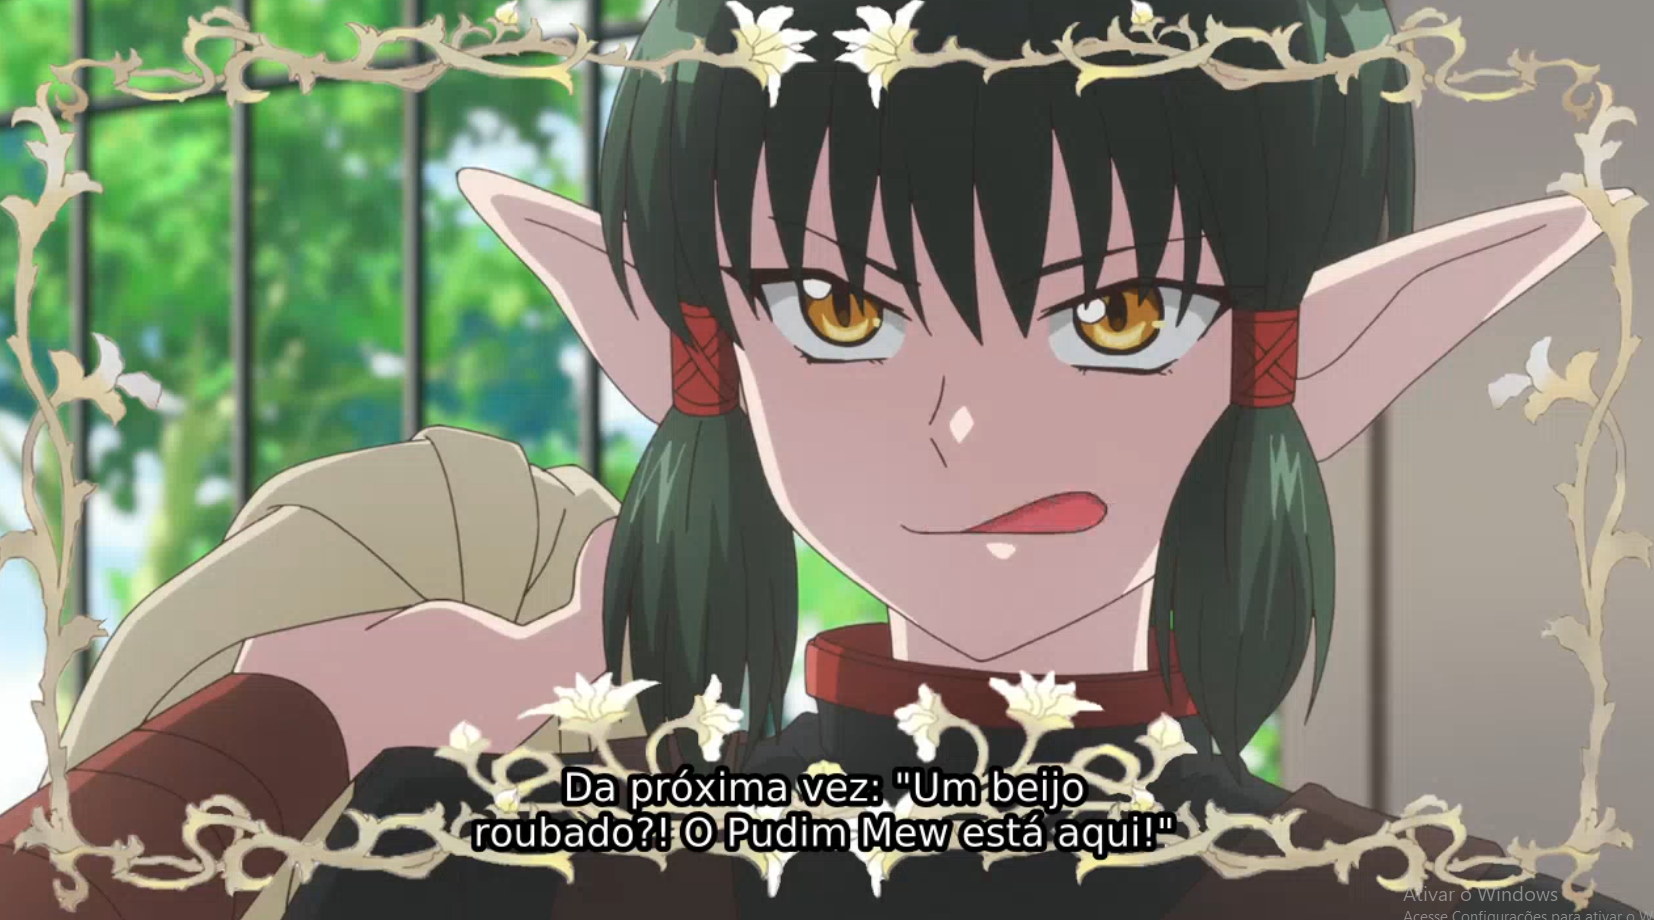 Tokyo Mew Mew New Episode 2 Summary and Impressions — The Geekly Grind